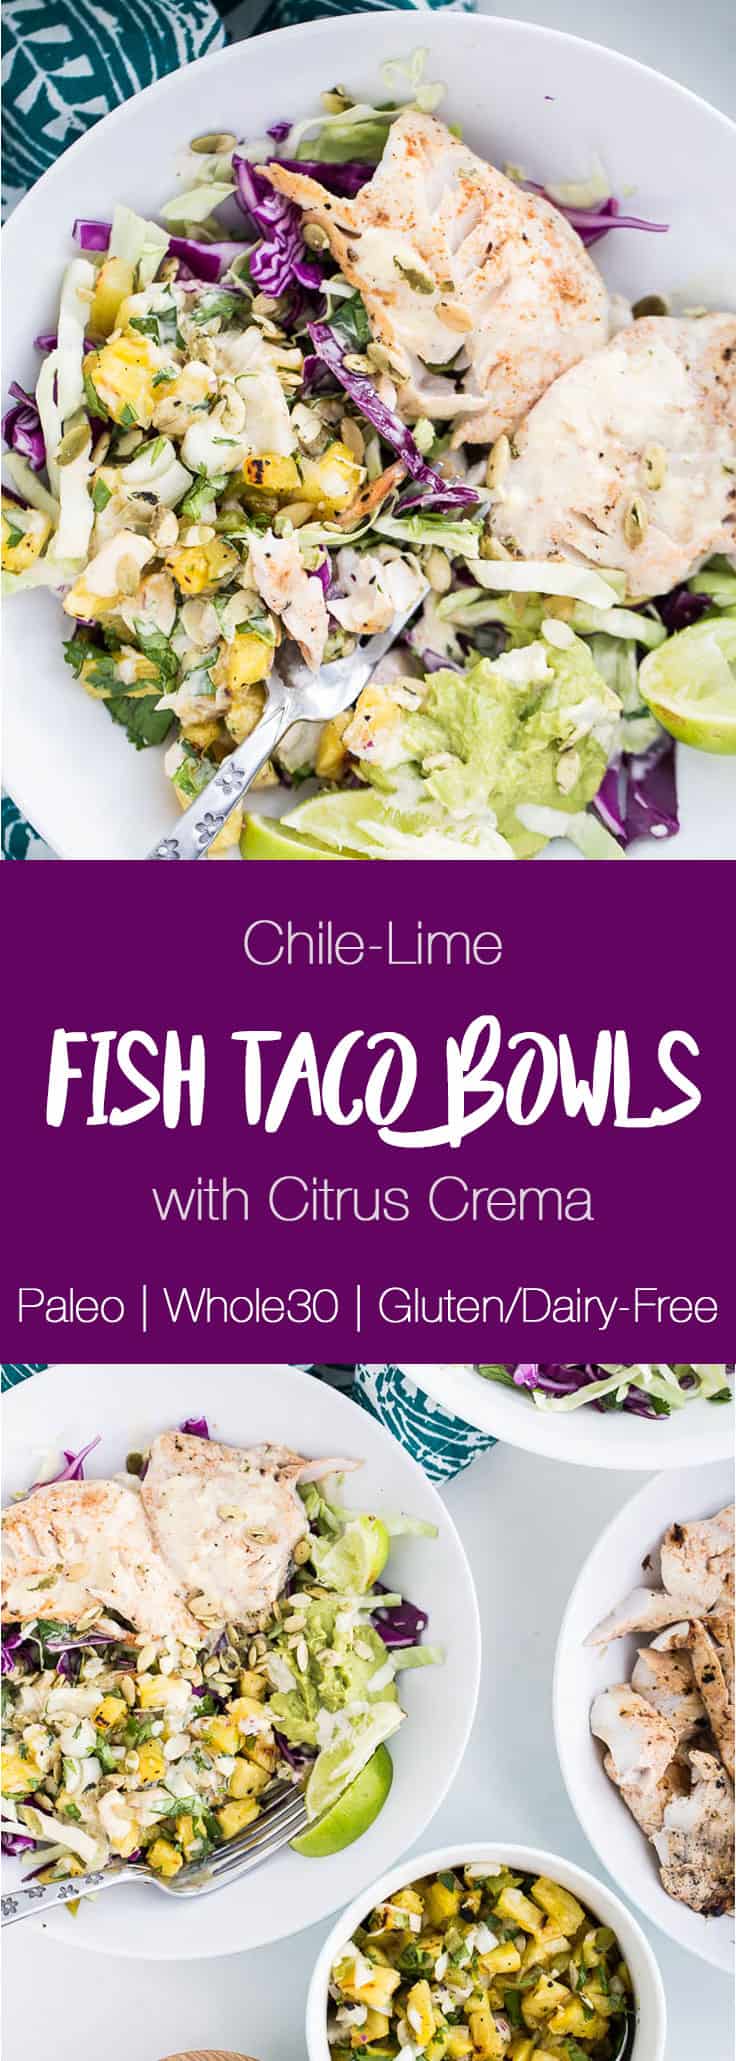 Chile-Lime Fish Taco Bowls with Citrus Crema - Perry's Plate